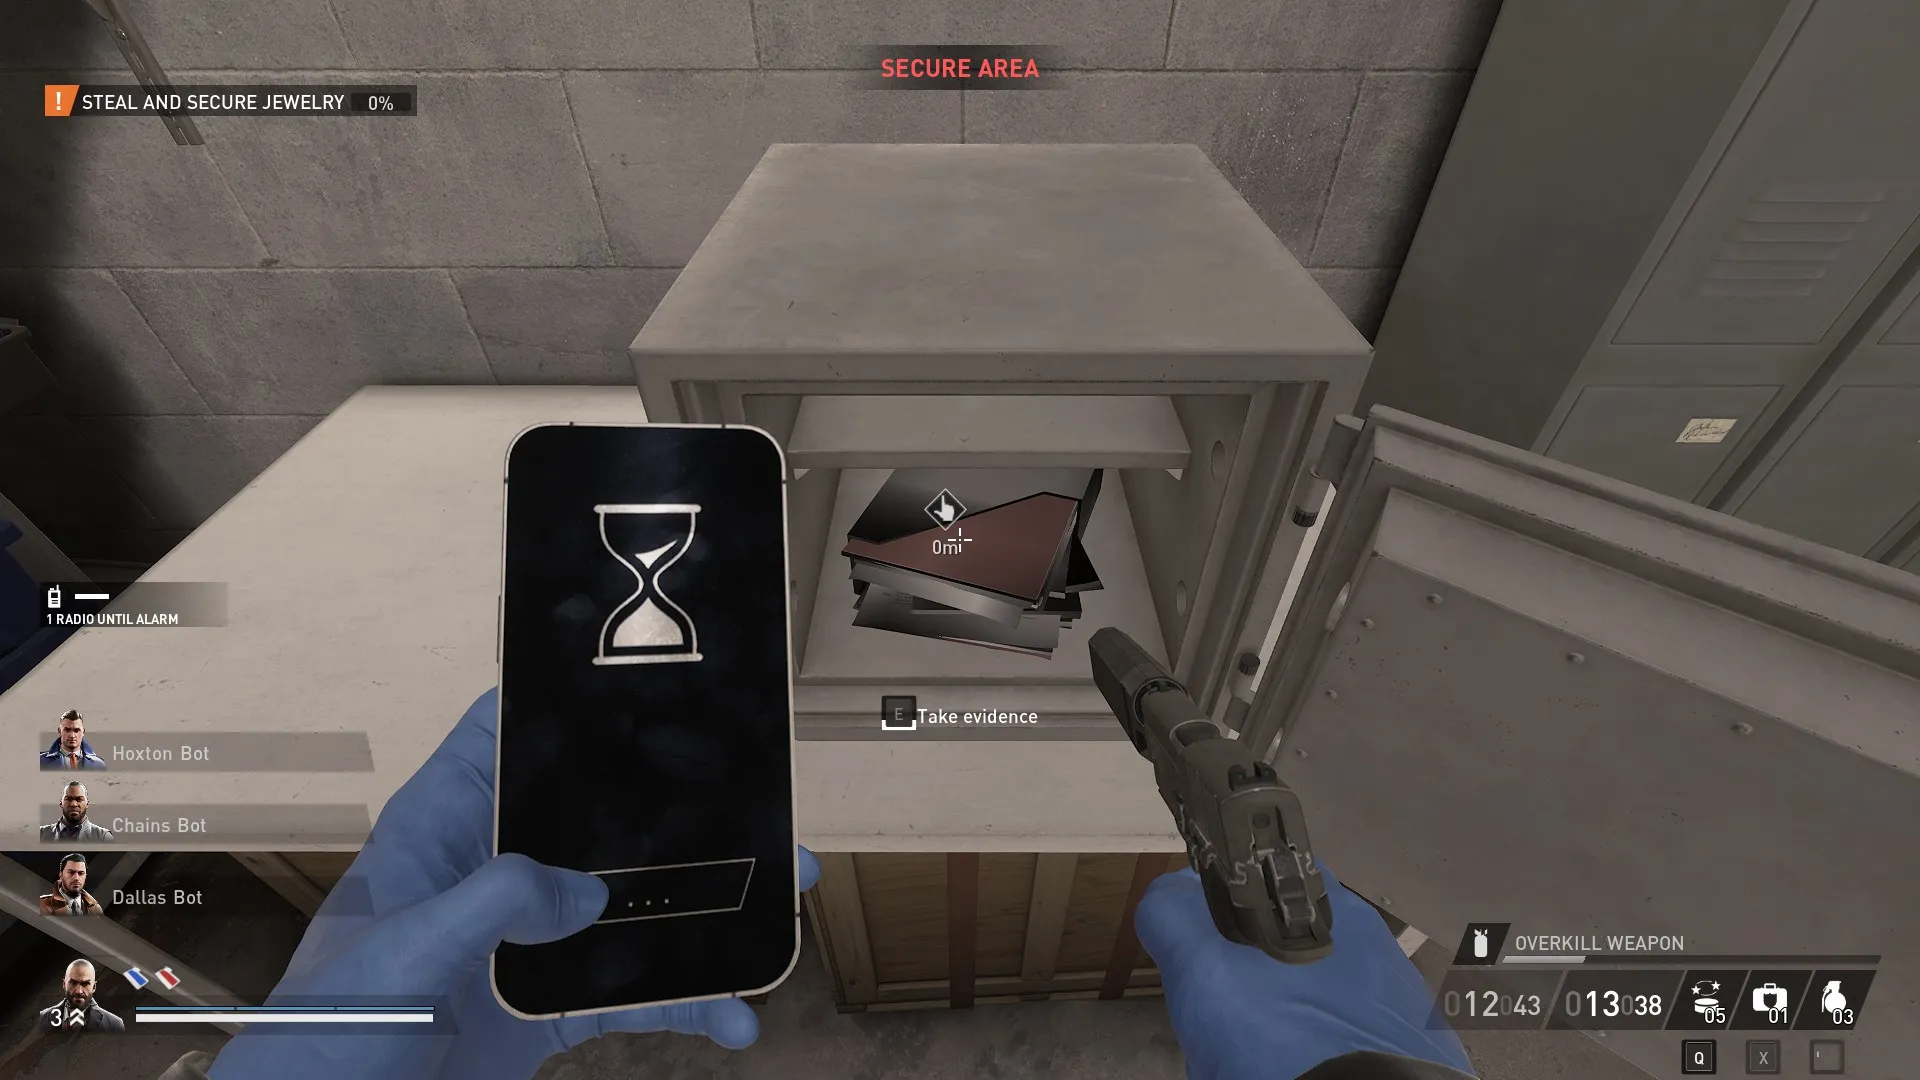 A heister with a pistol taking pictures of documents that were in a locked safe.